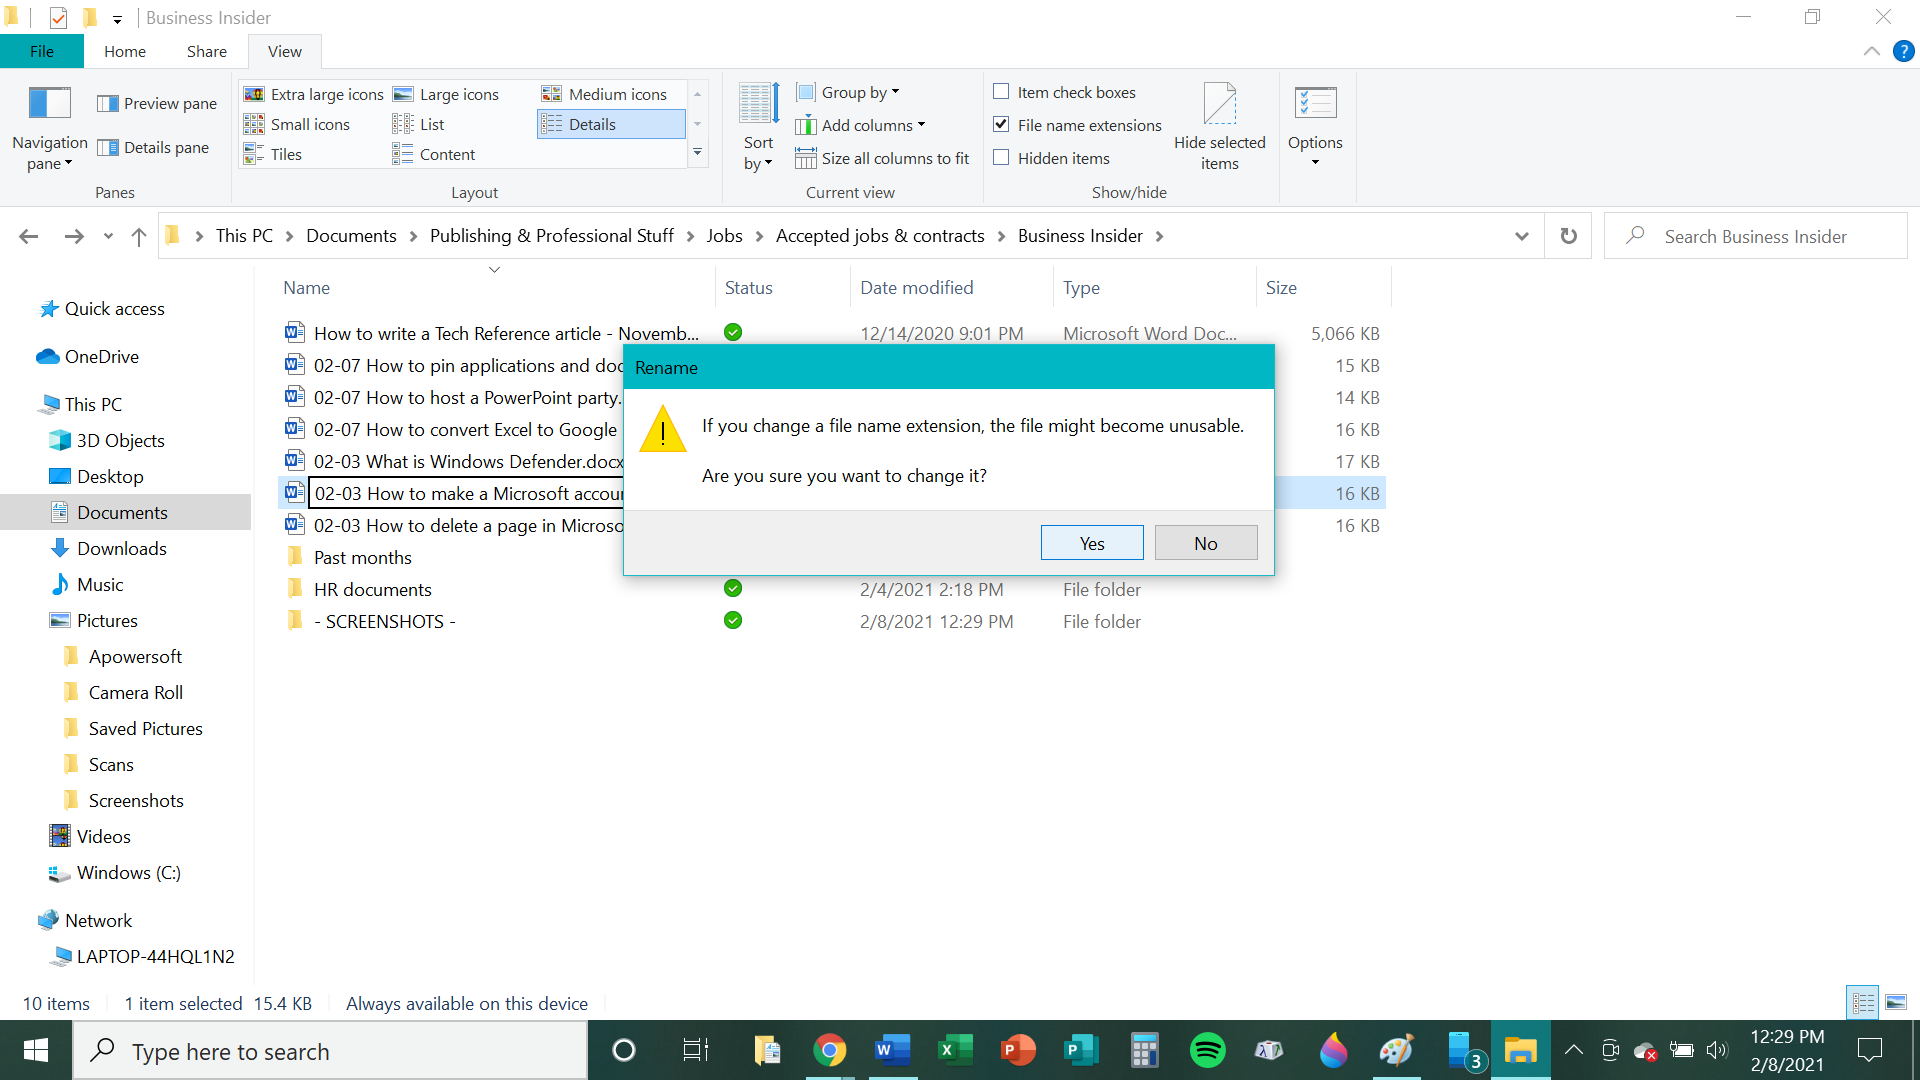 How to pin applications and documents on the Windows taskbar   6